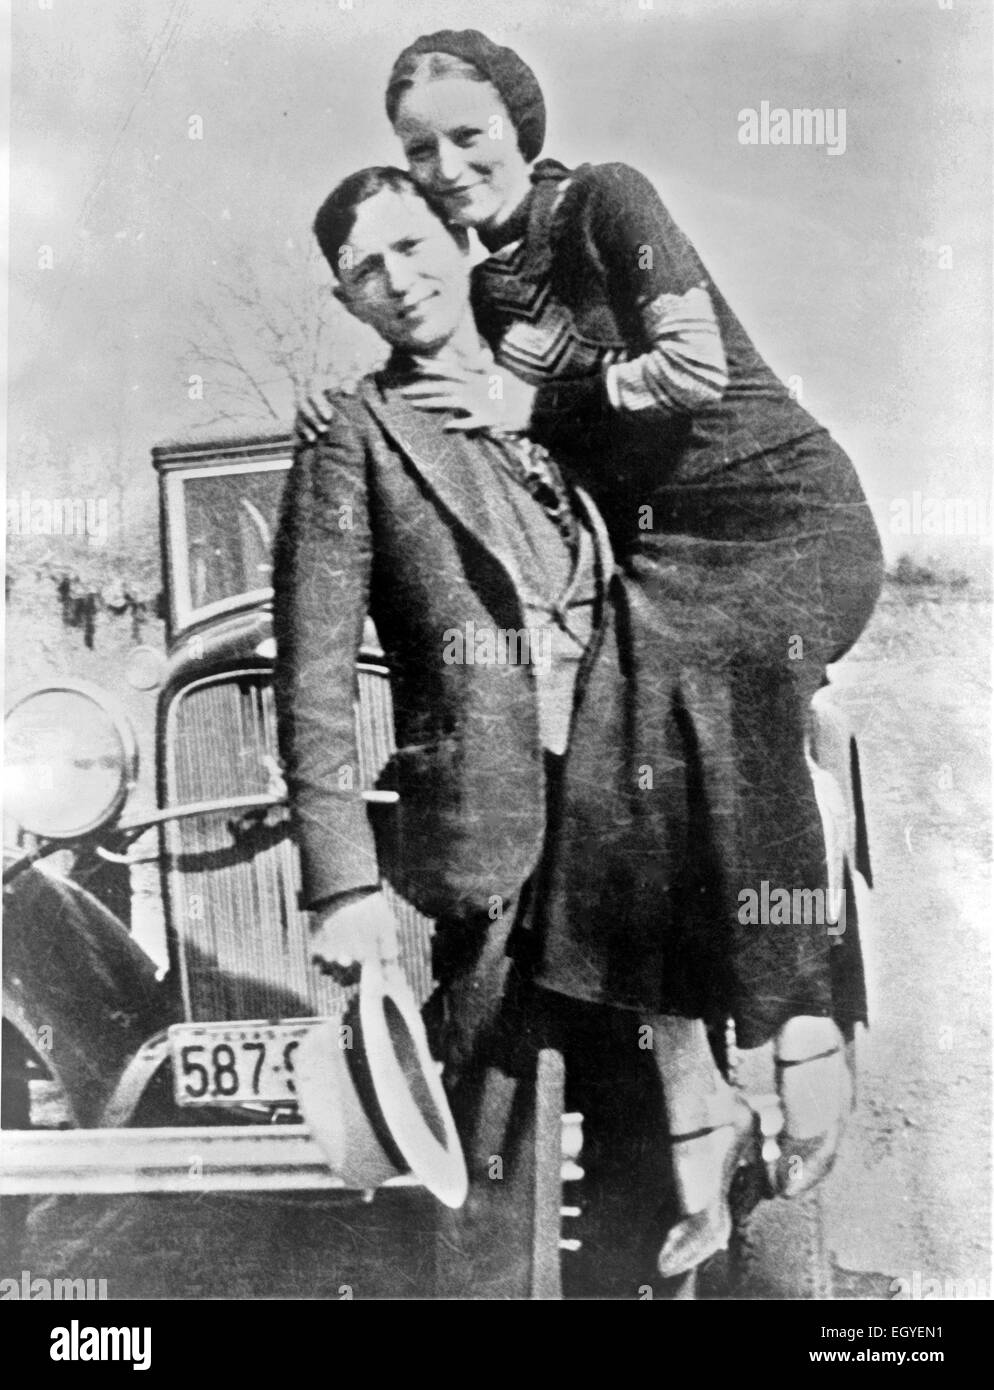 BONNIE AND CLYDE  Bonnie Parker and Clyde Barrow, American robbers from the Dallas area, in a March 1933 photo found at their hideout in Joplin, Missouri Stock Photo